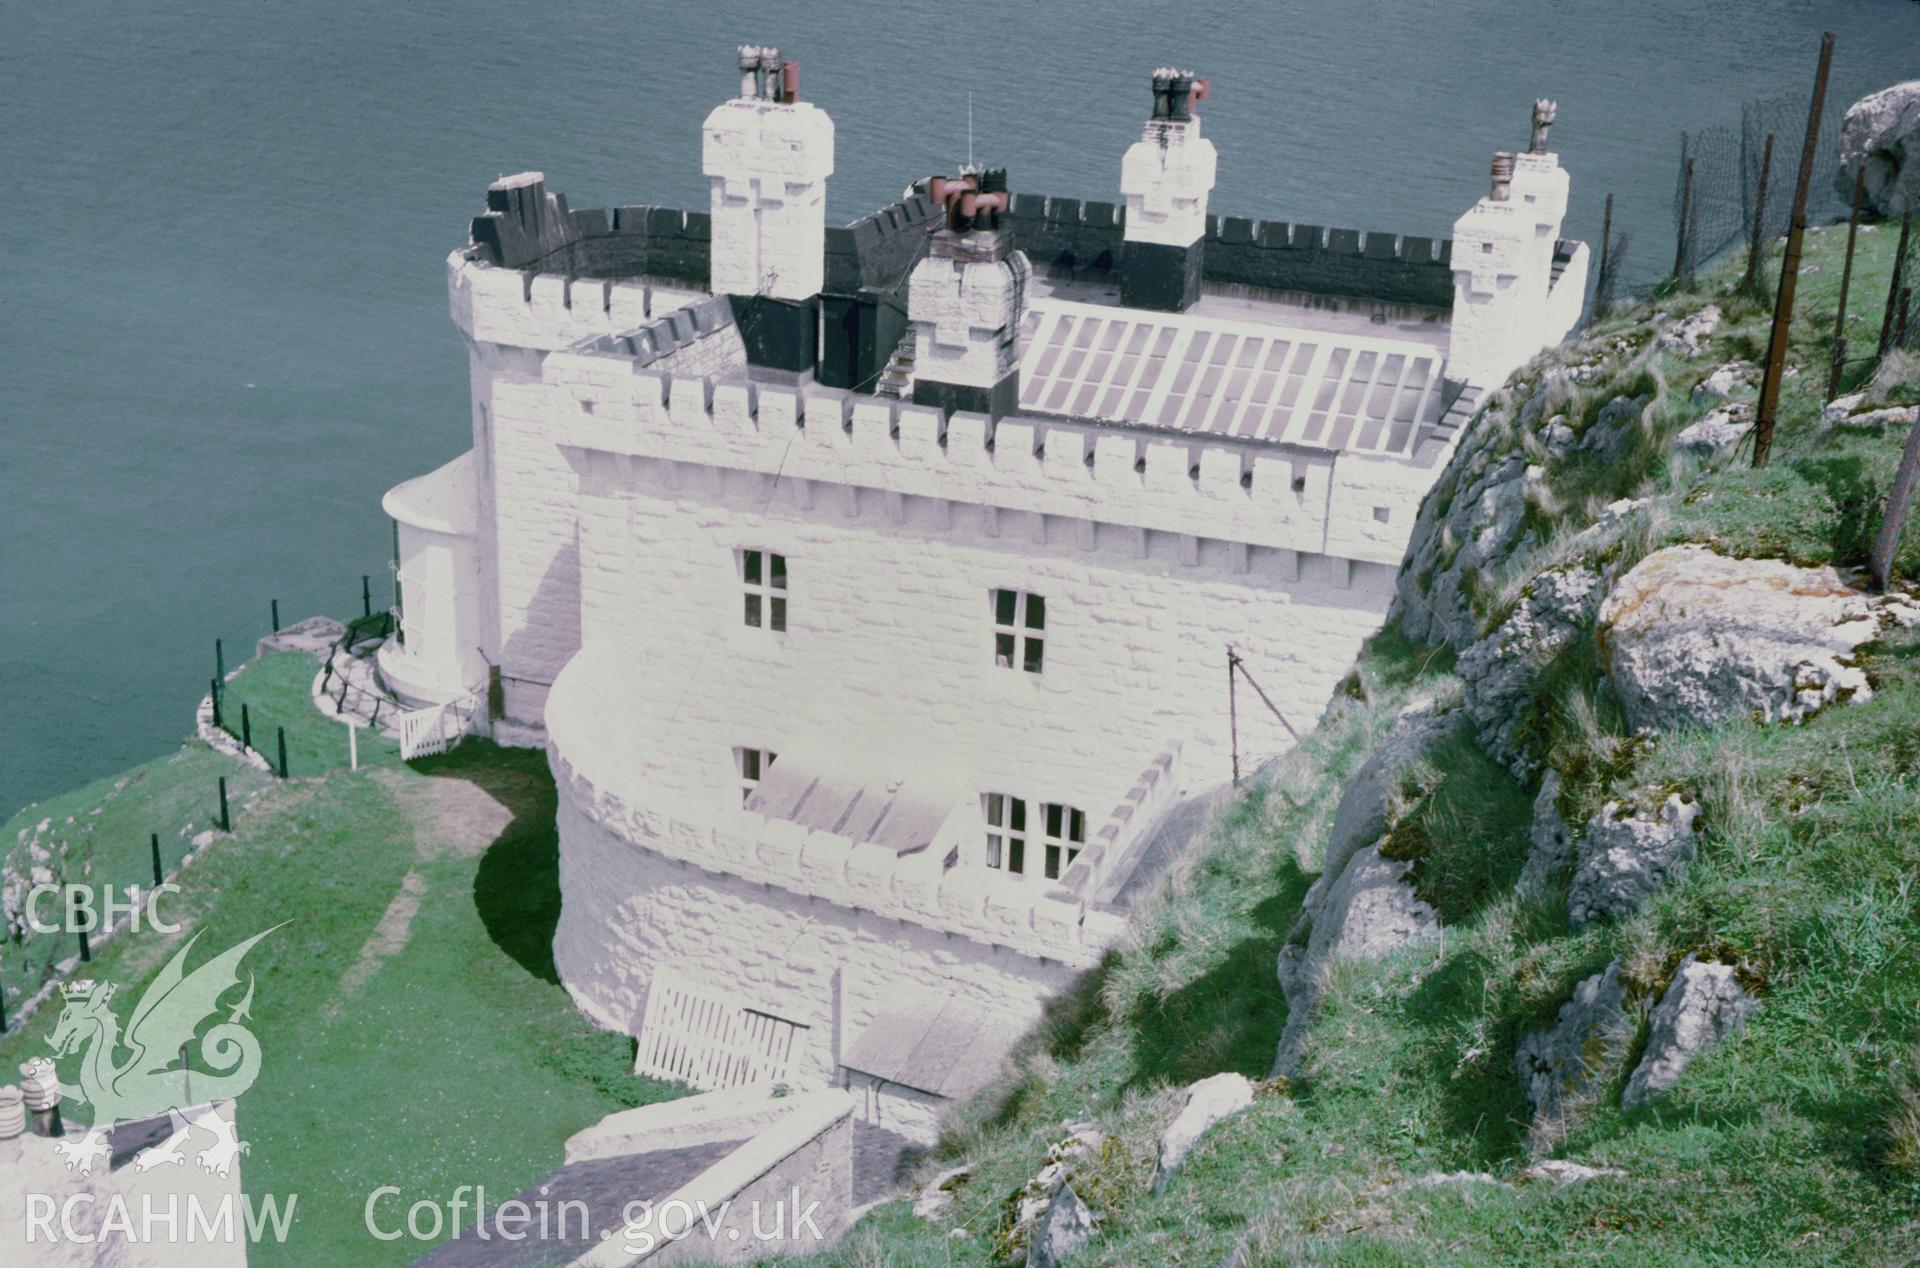 Colour 35mm slide of Great Orme Lighthouse, Llandudno, Caernarvonshire, by Dylan Roberts.